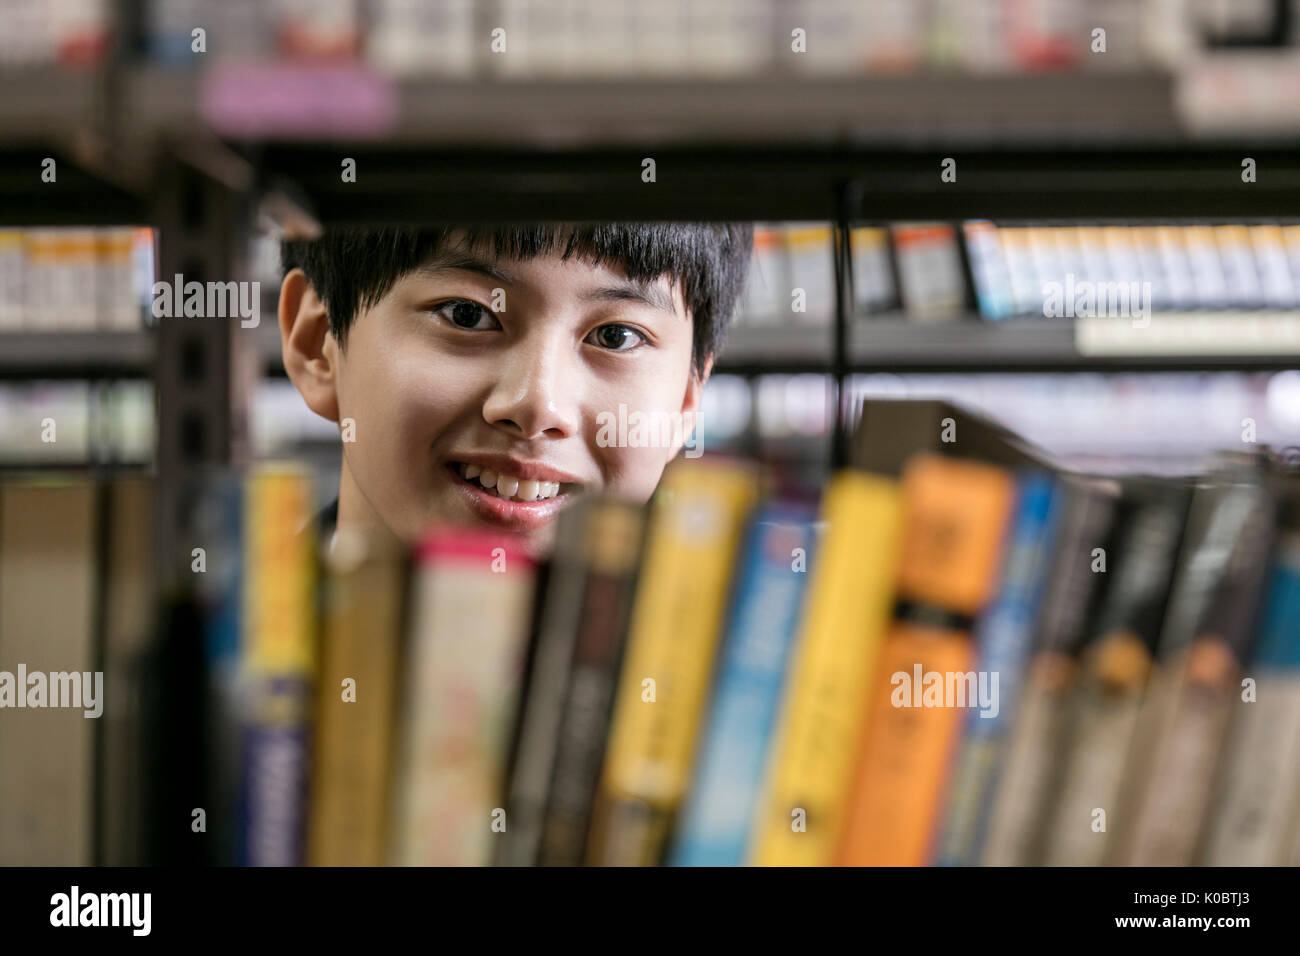 Portrait of smiling school boy in library Stock Photo